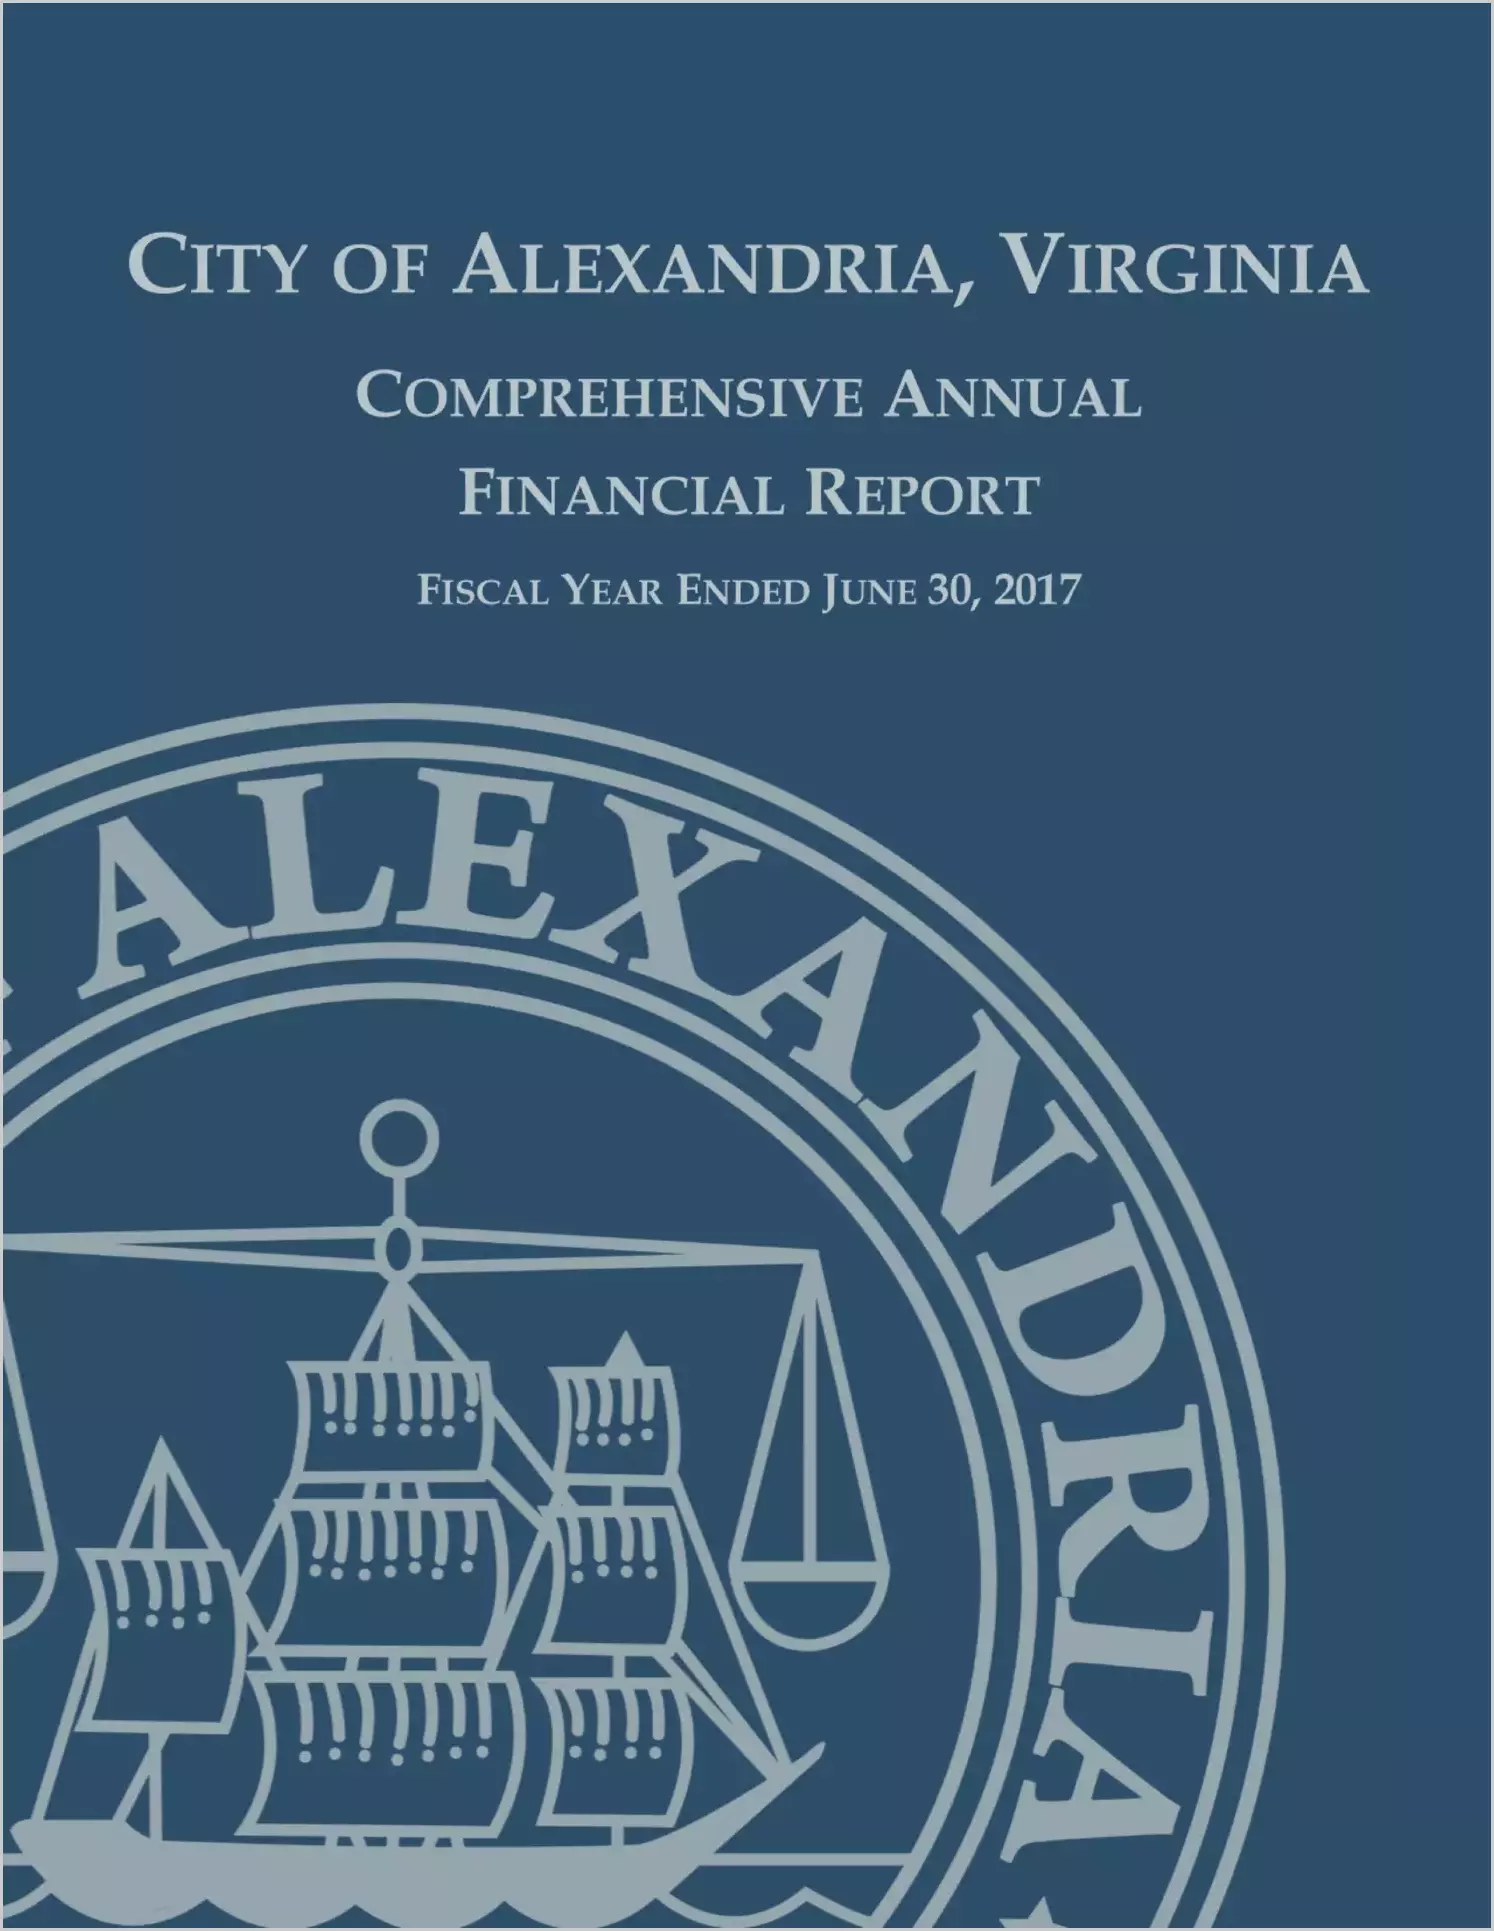 2017 Annual Financial Report for City of Alexandria